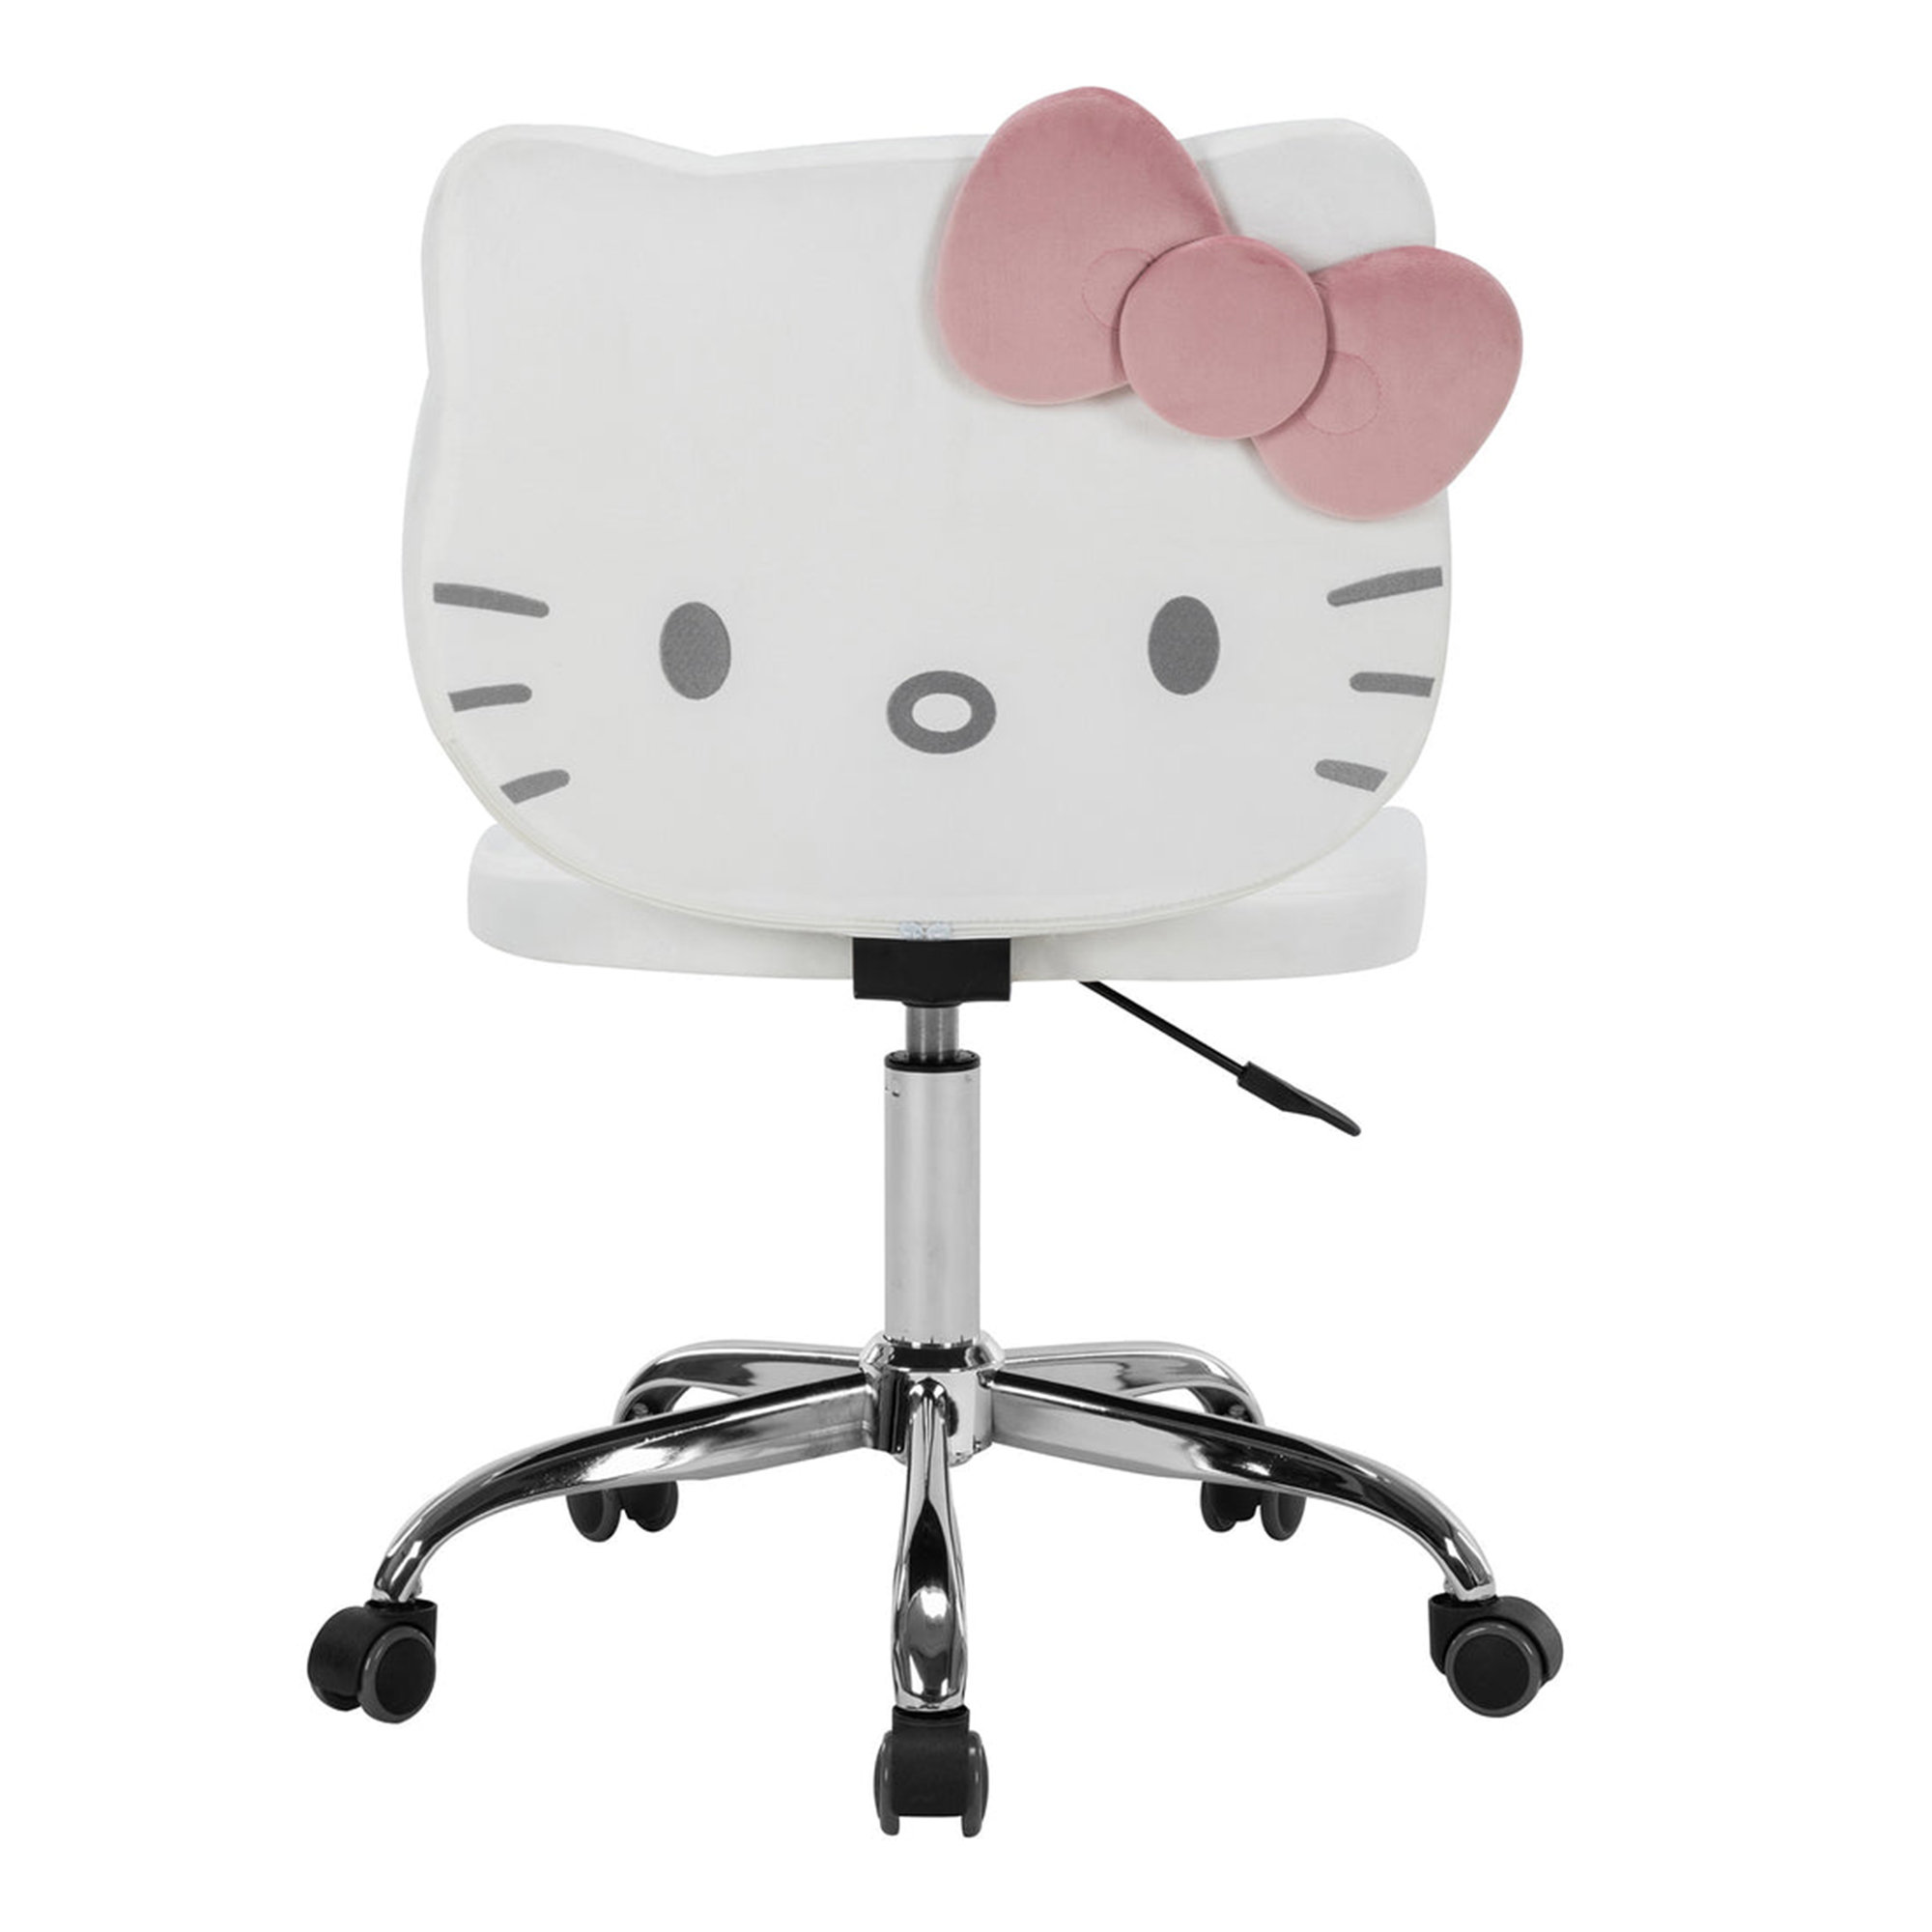 How Old Is Hello Kitty? Answered (2023 Updated)